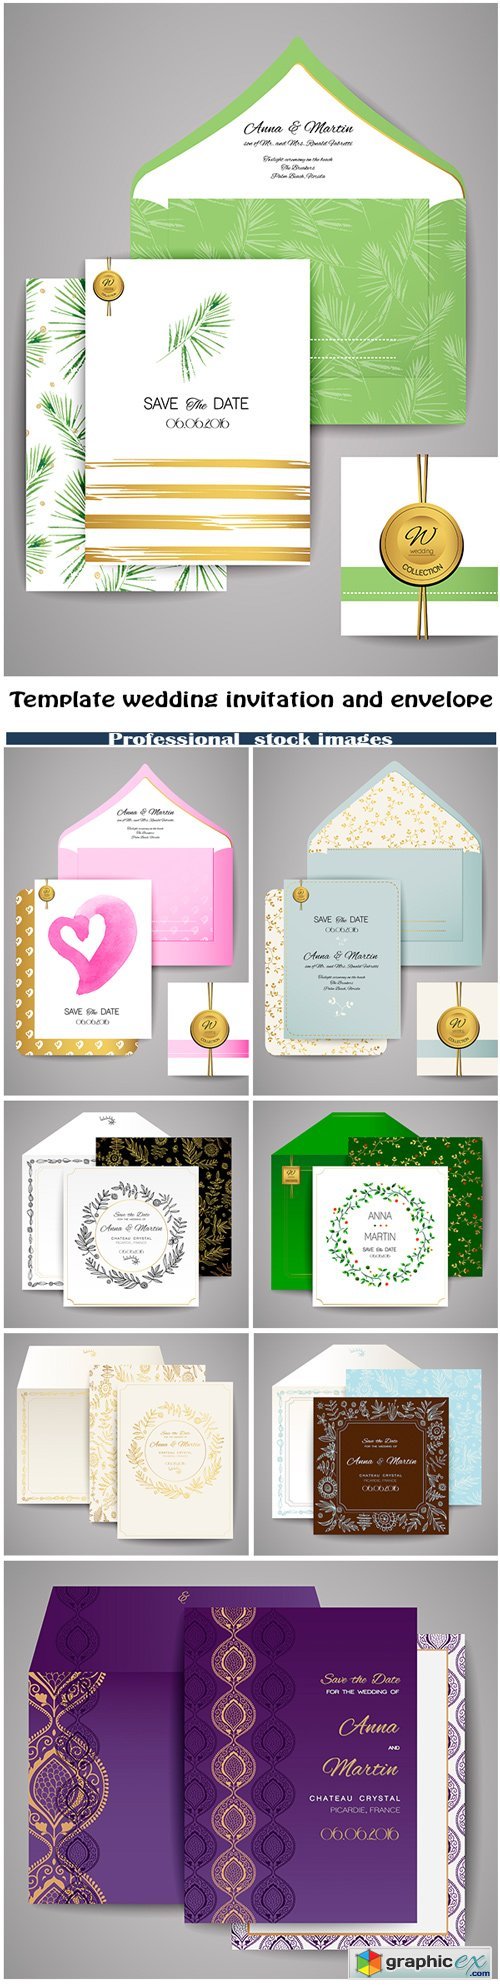 Template wedding invitation and envelope